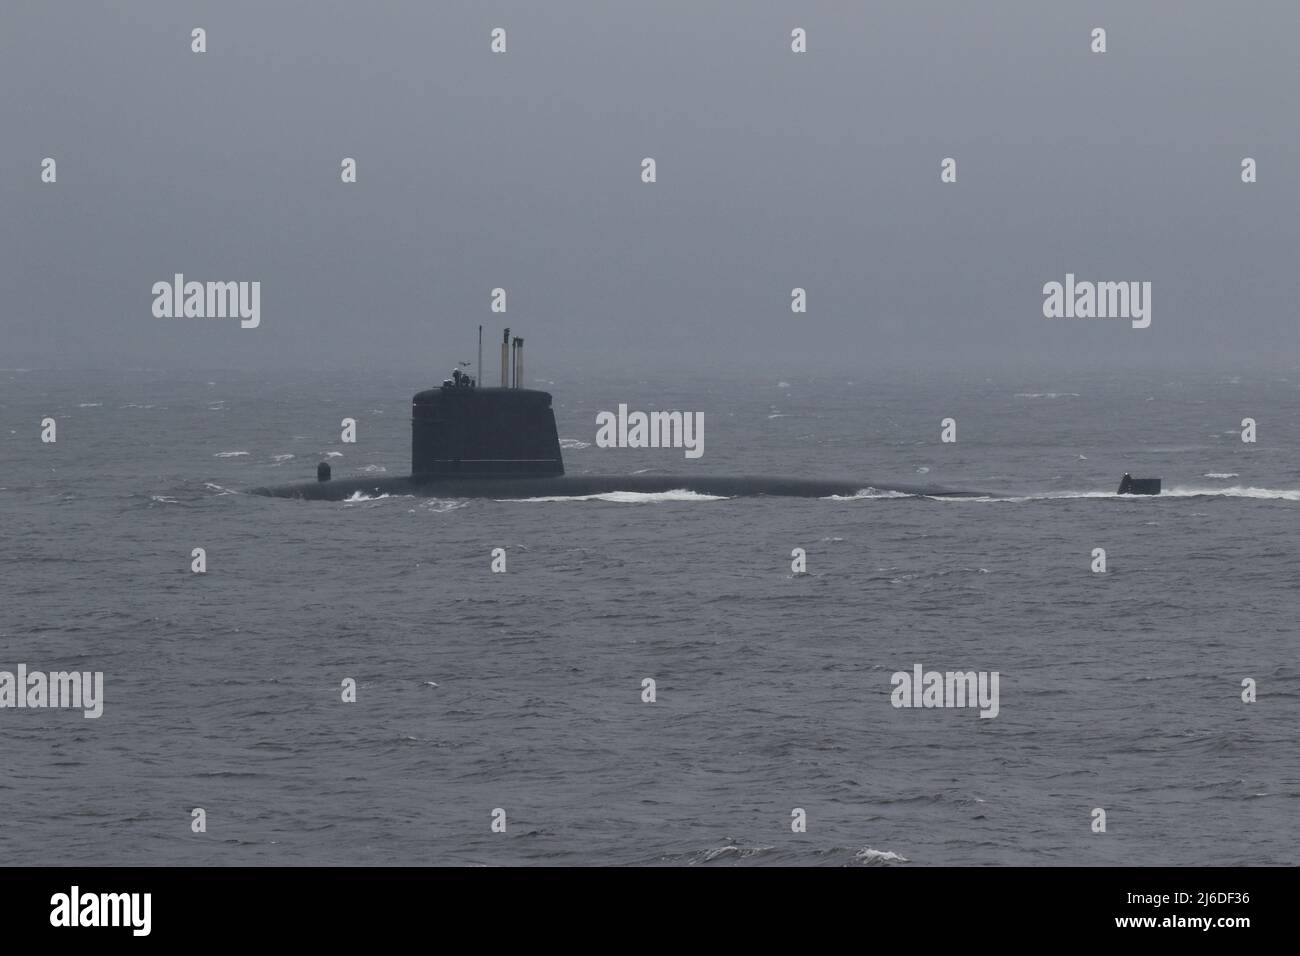 FS Casabianca (S603), a Rubis-class nuclear-powered attack submarine (SSN) operated by the French Navy, passing Gourock on the Firth of Clyde on a dull and dreary day, shortly after her departure from the Faslane naval base. Stock Photo